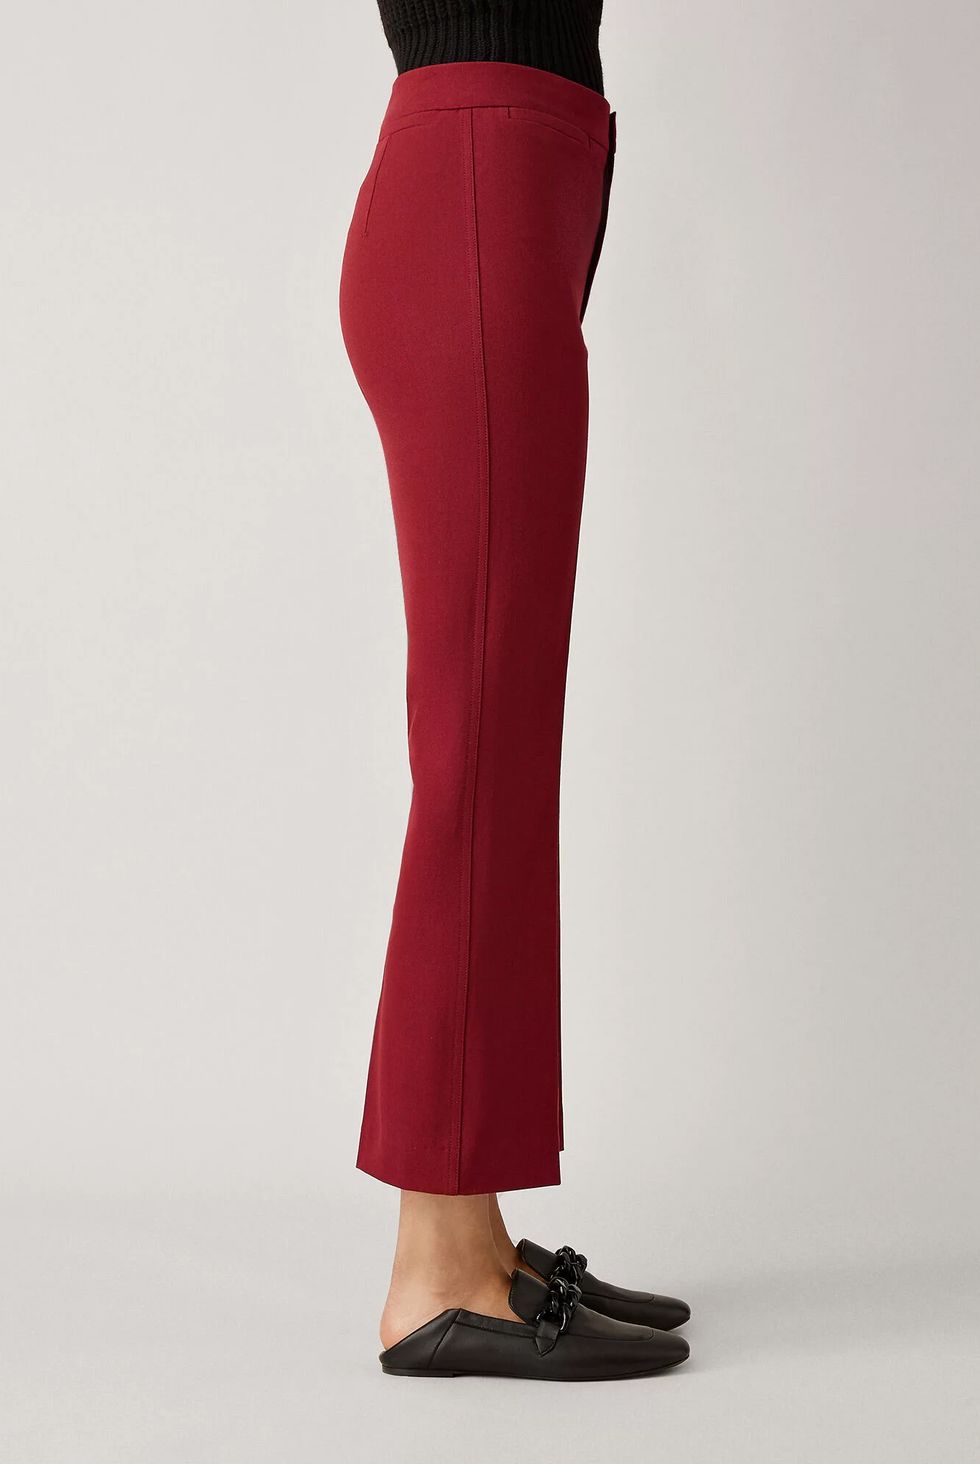 kate middleton red trousers